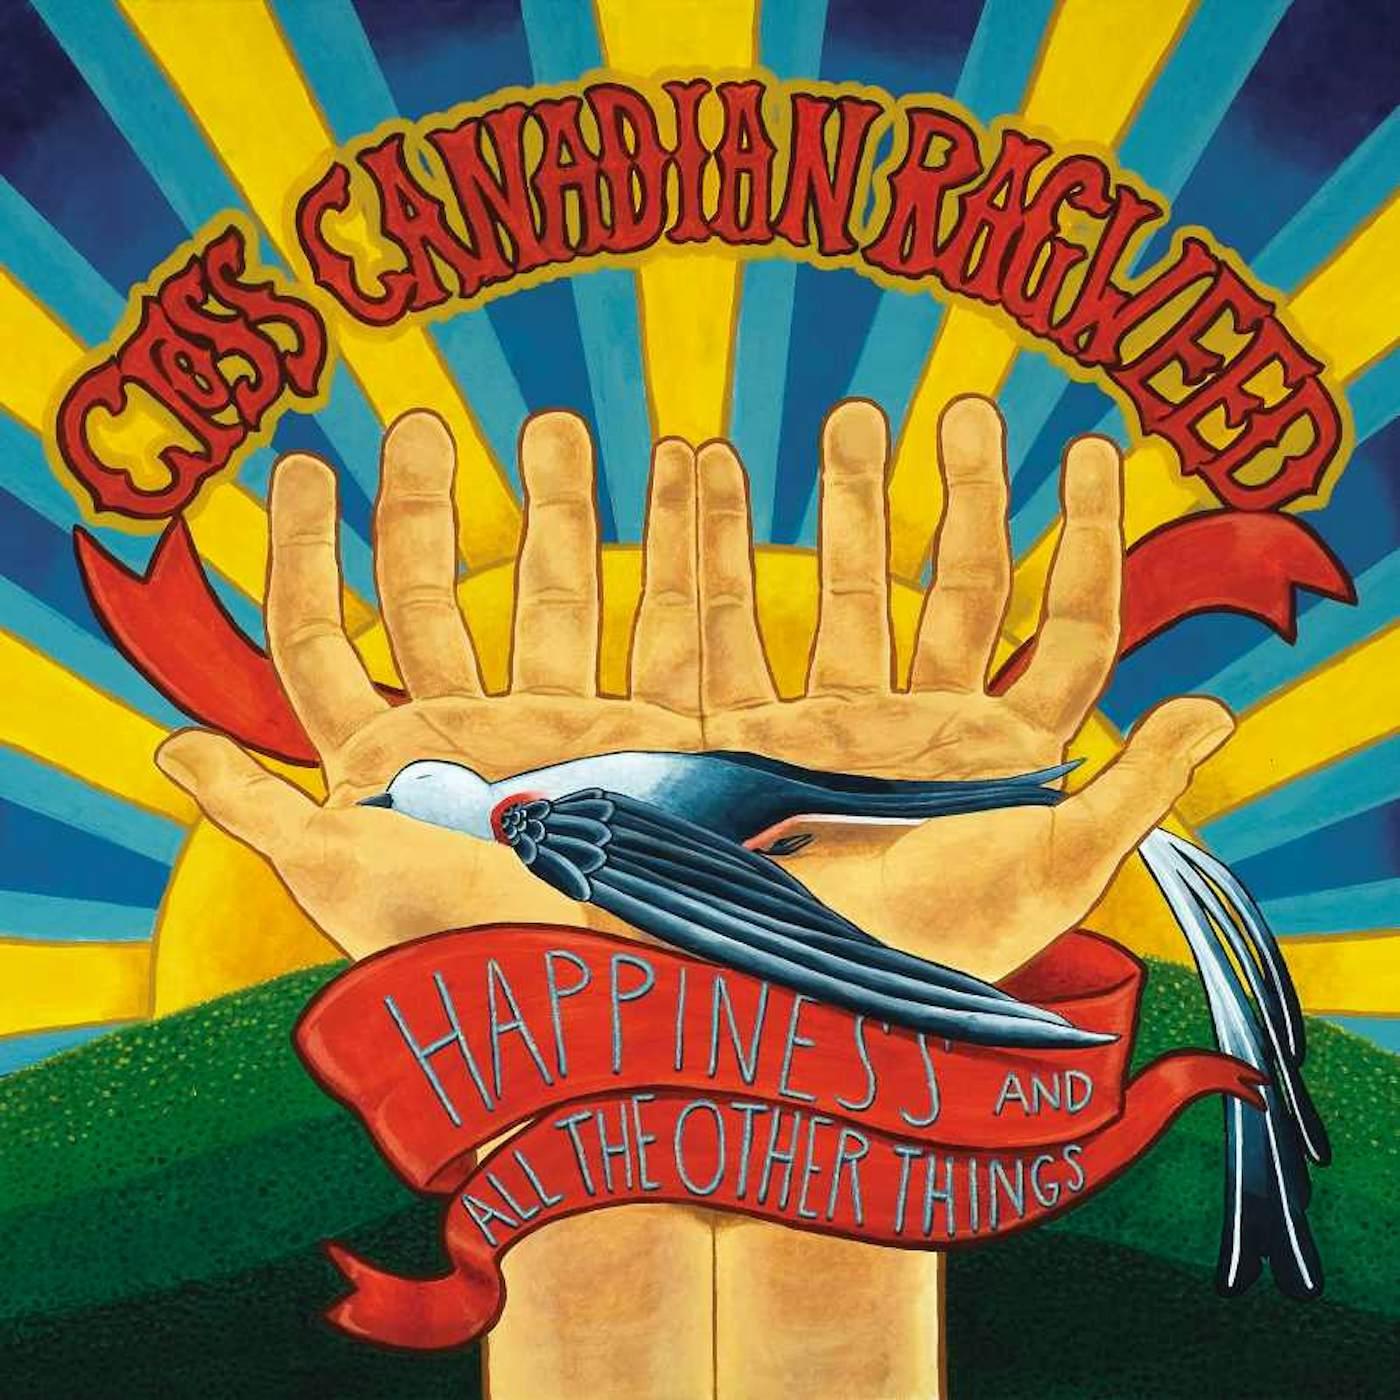 Cross Canadian Ragweed Happiness And All The Other Things (Limited Edition) CD